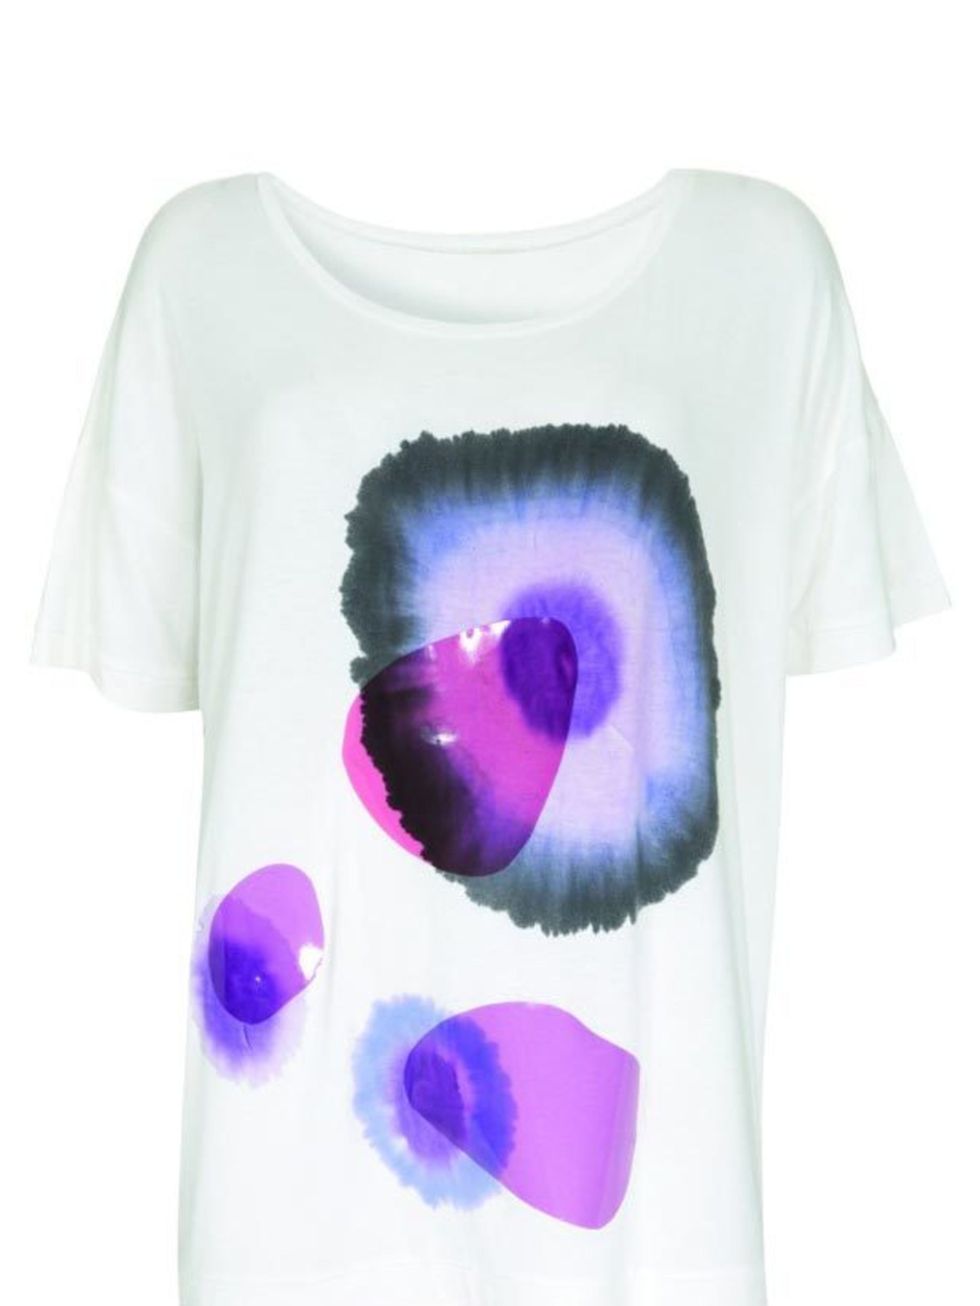 <p>A selection of young international designers have just landed in Topshop. Our favourite? This festival-ready T-shirt by StarStyling Starstyling printed T-shirt, £185, at <a href="http://www.topshop.com/webapp/wcs/stores/servlet/CatalogNavigationSearch